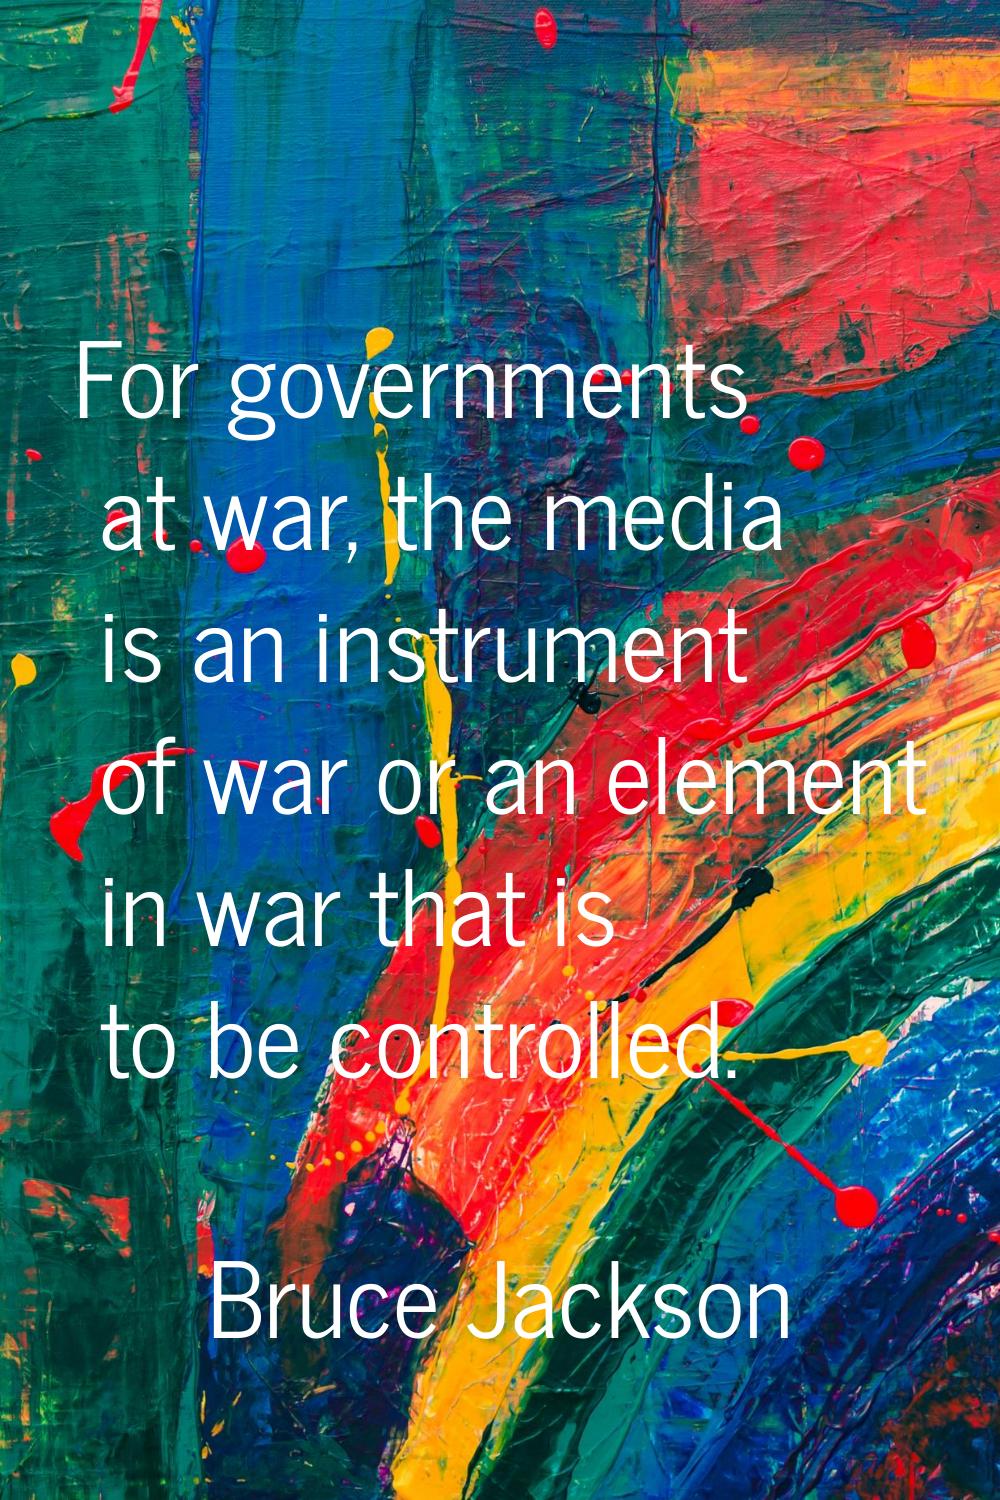 For governments at war, the media is an instrument of war or an element in war that is to be contro